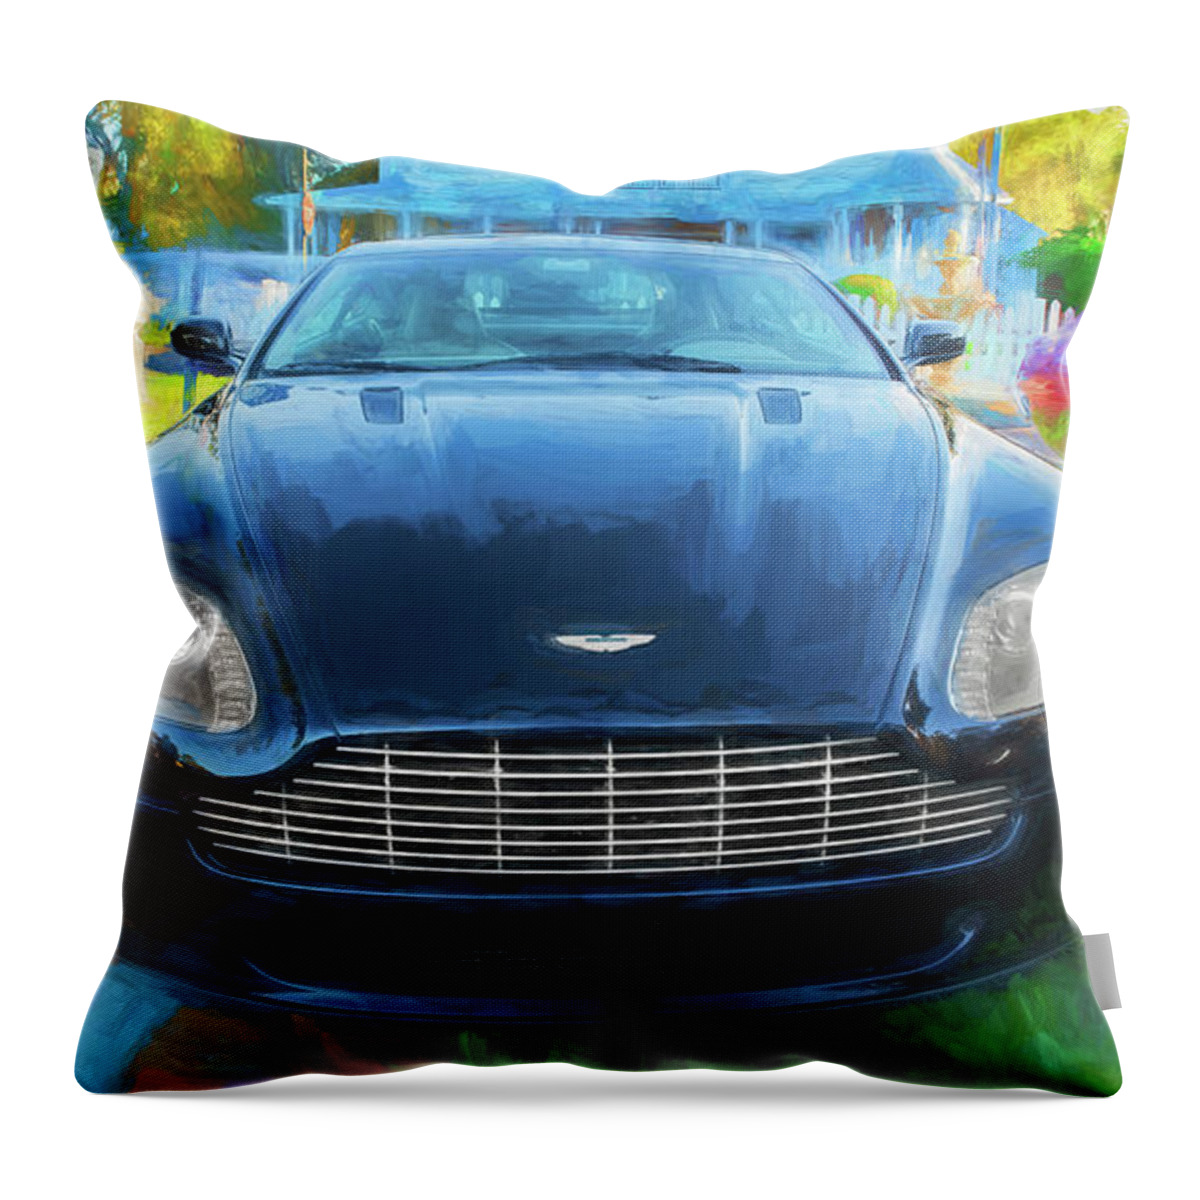 2007 Aston Martin V8 Vantage Roadster Throw Pillow featuring the photograph 2007 Aston Martin V8 Vantage Roadster 105 by Rich Franco